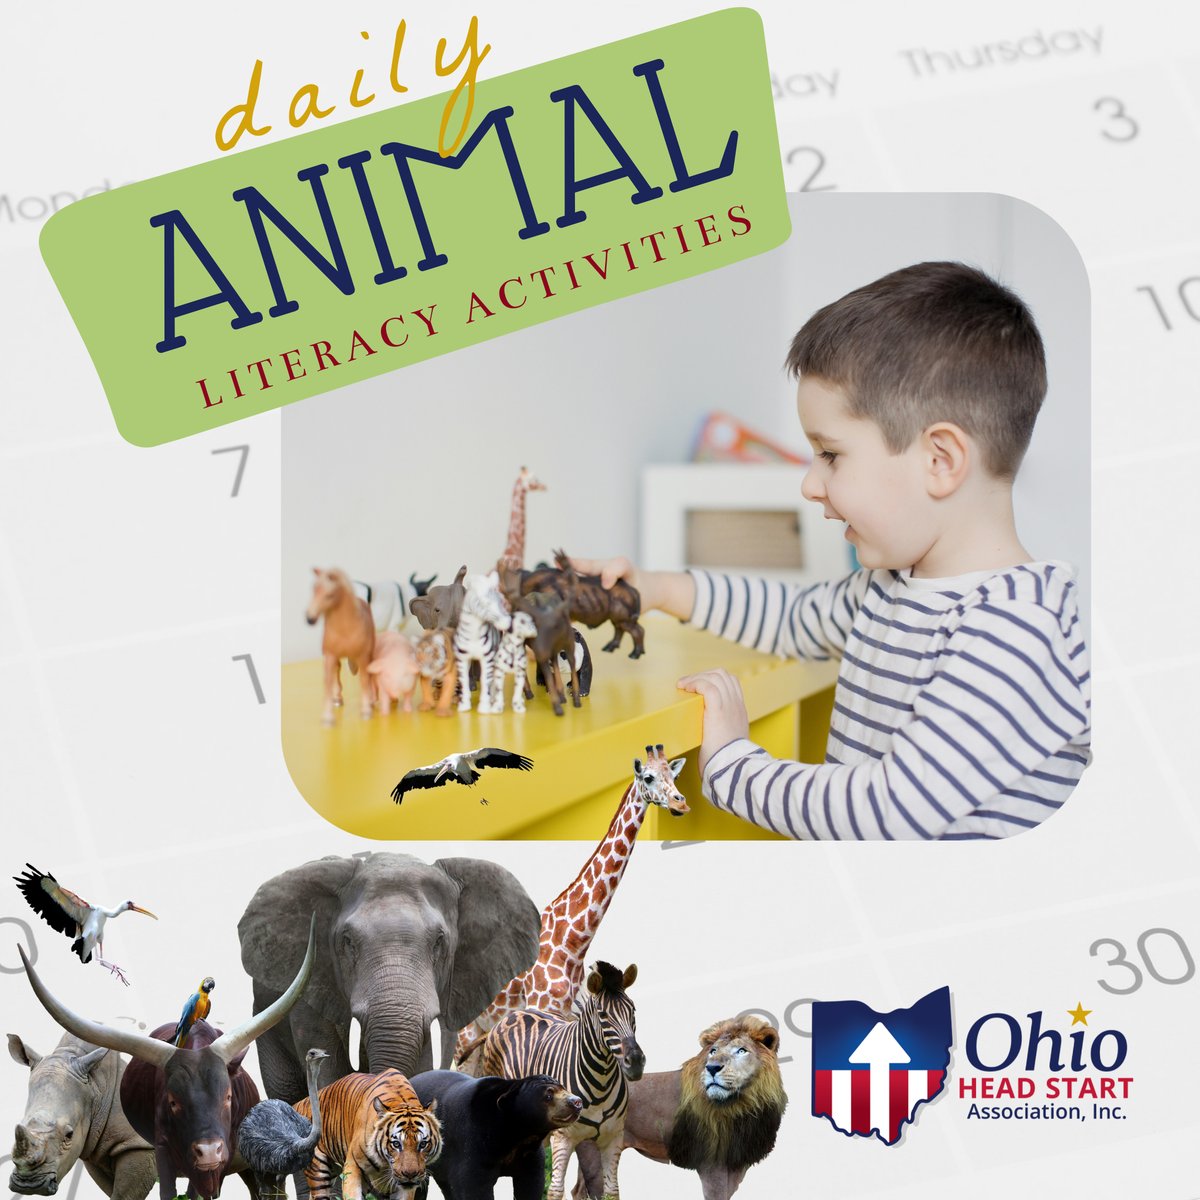 Day By Day Ohio provides families, caregivers, educators, and librarians with Family Literacy Calendars to use at home, library, classroom, or on the go. 

#Headstart #EarlyHeadstart #EarlyChildhoodEducation #EarlyChildhoodDevelopment #OhioEducation #OhioHeadstart #OHSAI